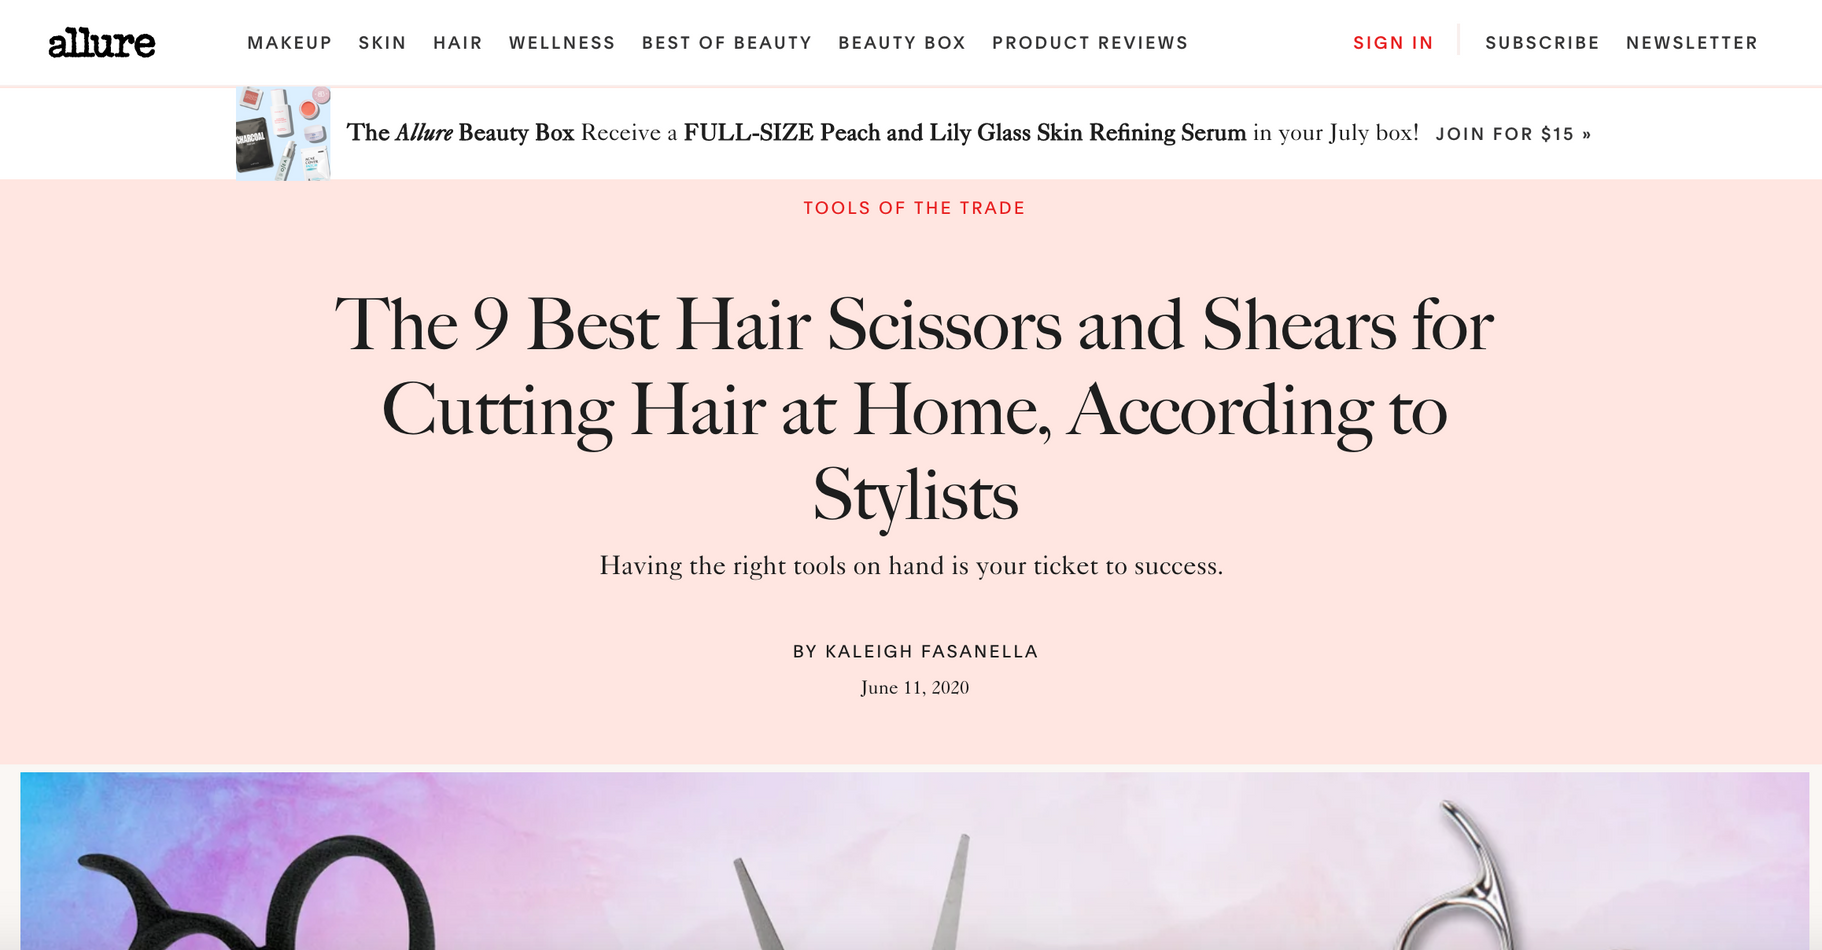 The 9 Best Hair Scissors for Cutting Hair at Home, According to Stylists